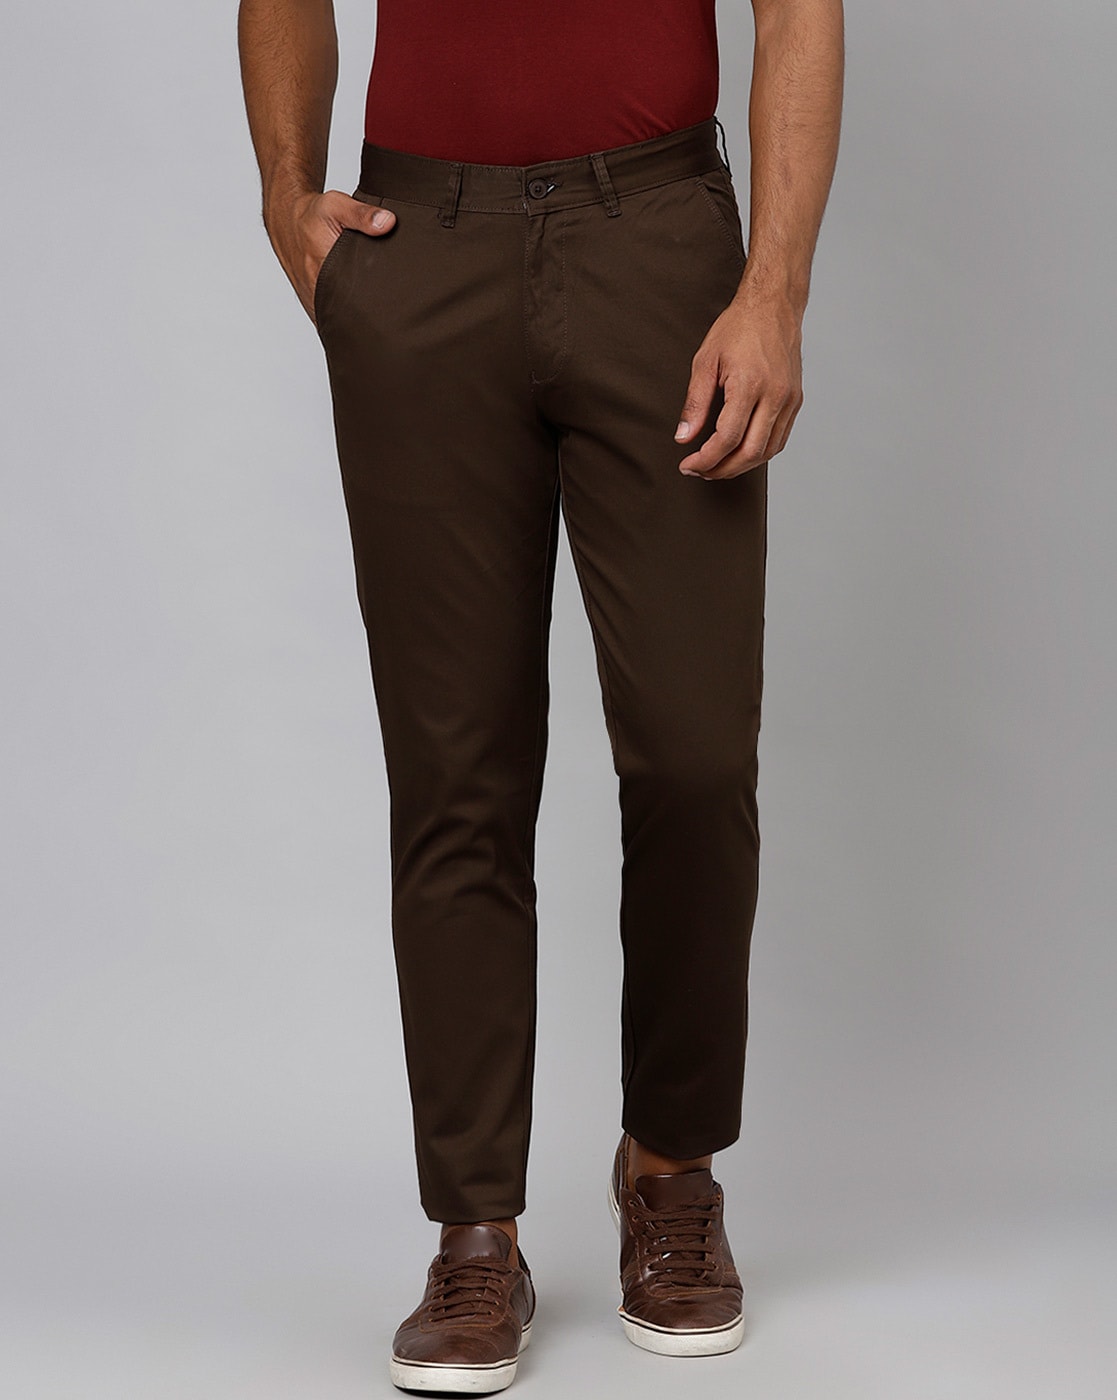 Cargo Pants for Men - Cuffed, Cotton & More | Tommy Hilfiger® SI